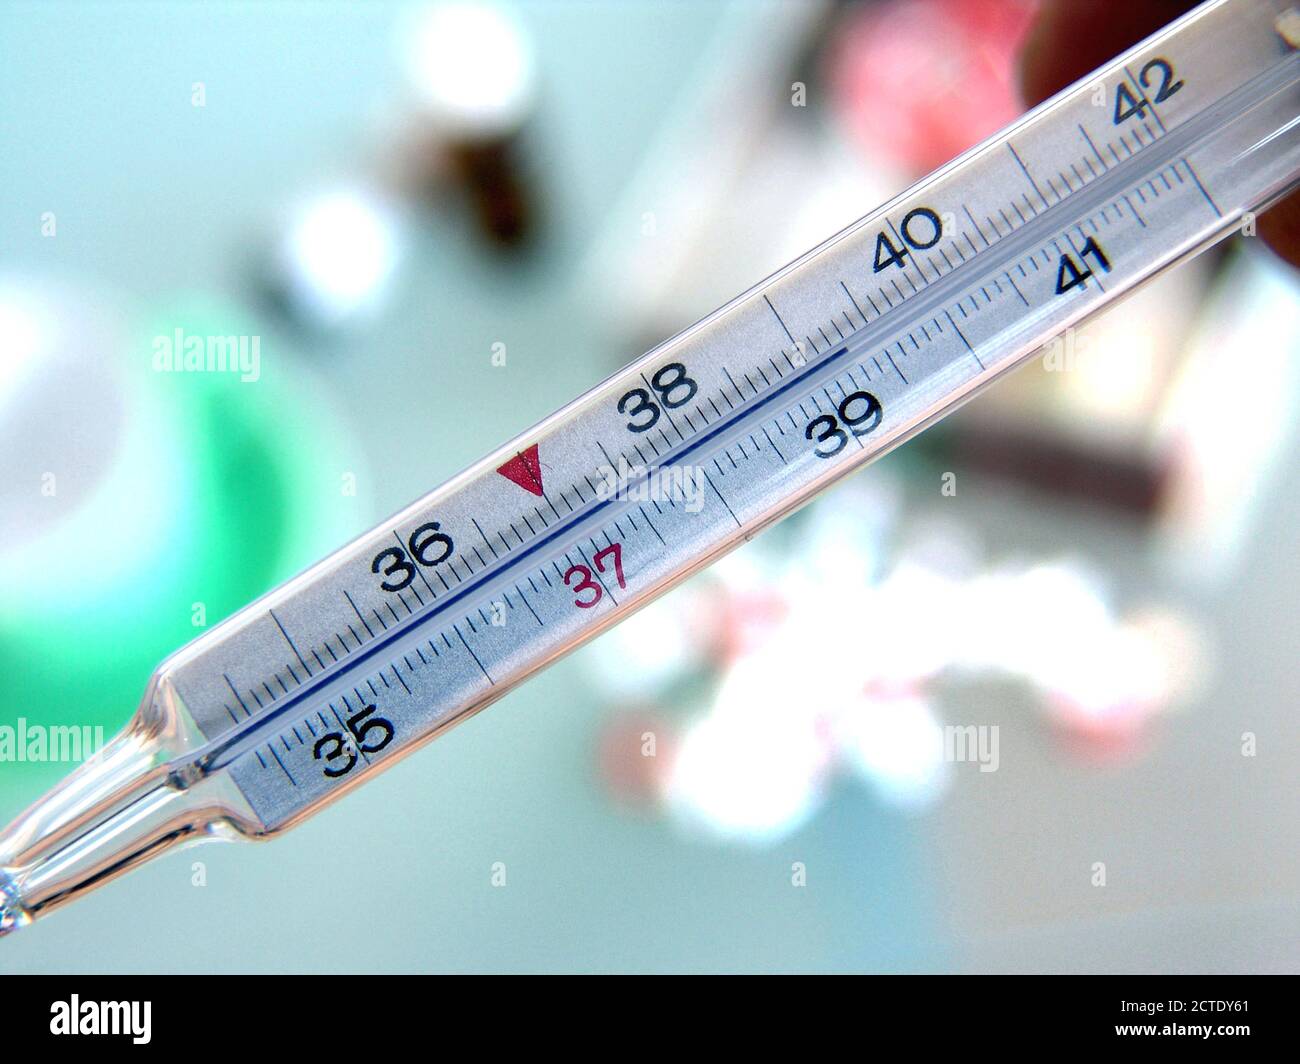 thermometer shows fever of 37 degree centigrade, Europe Stock Photo